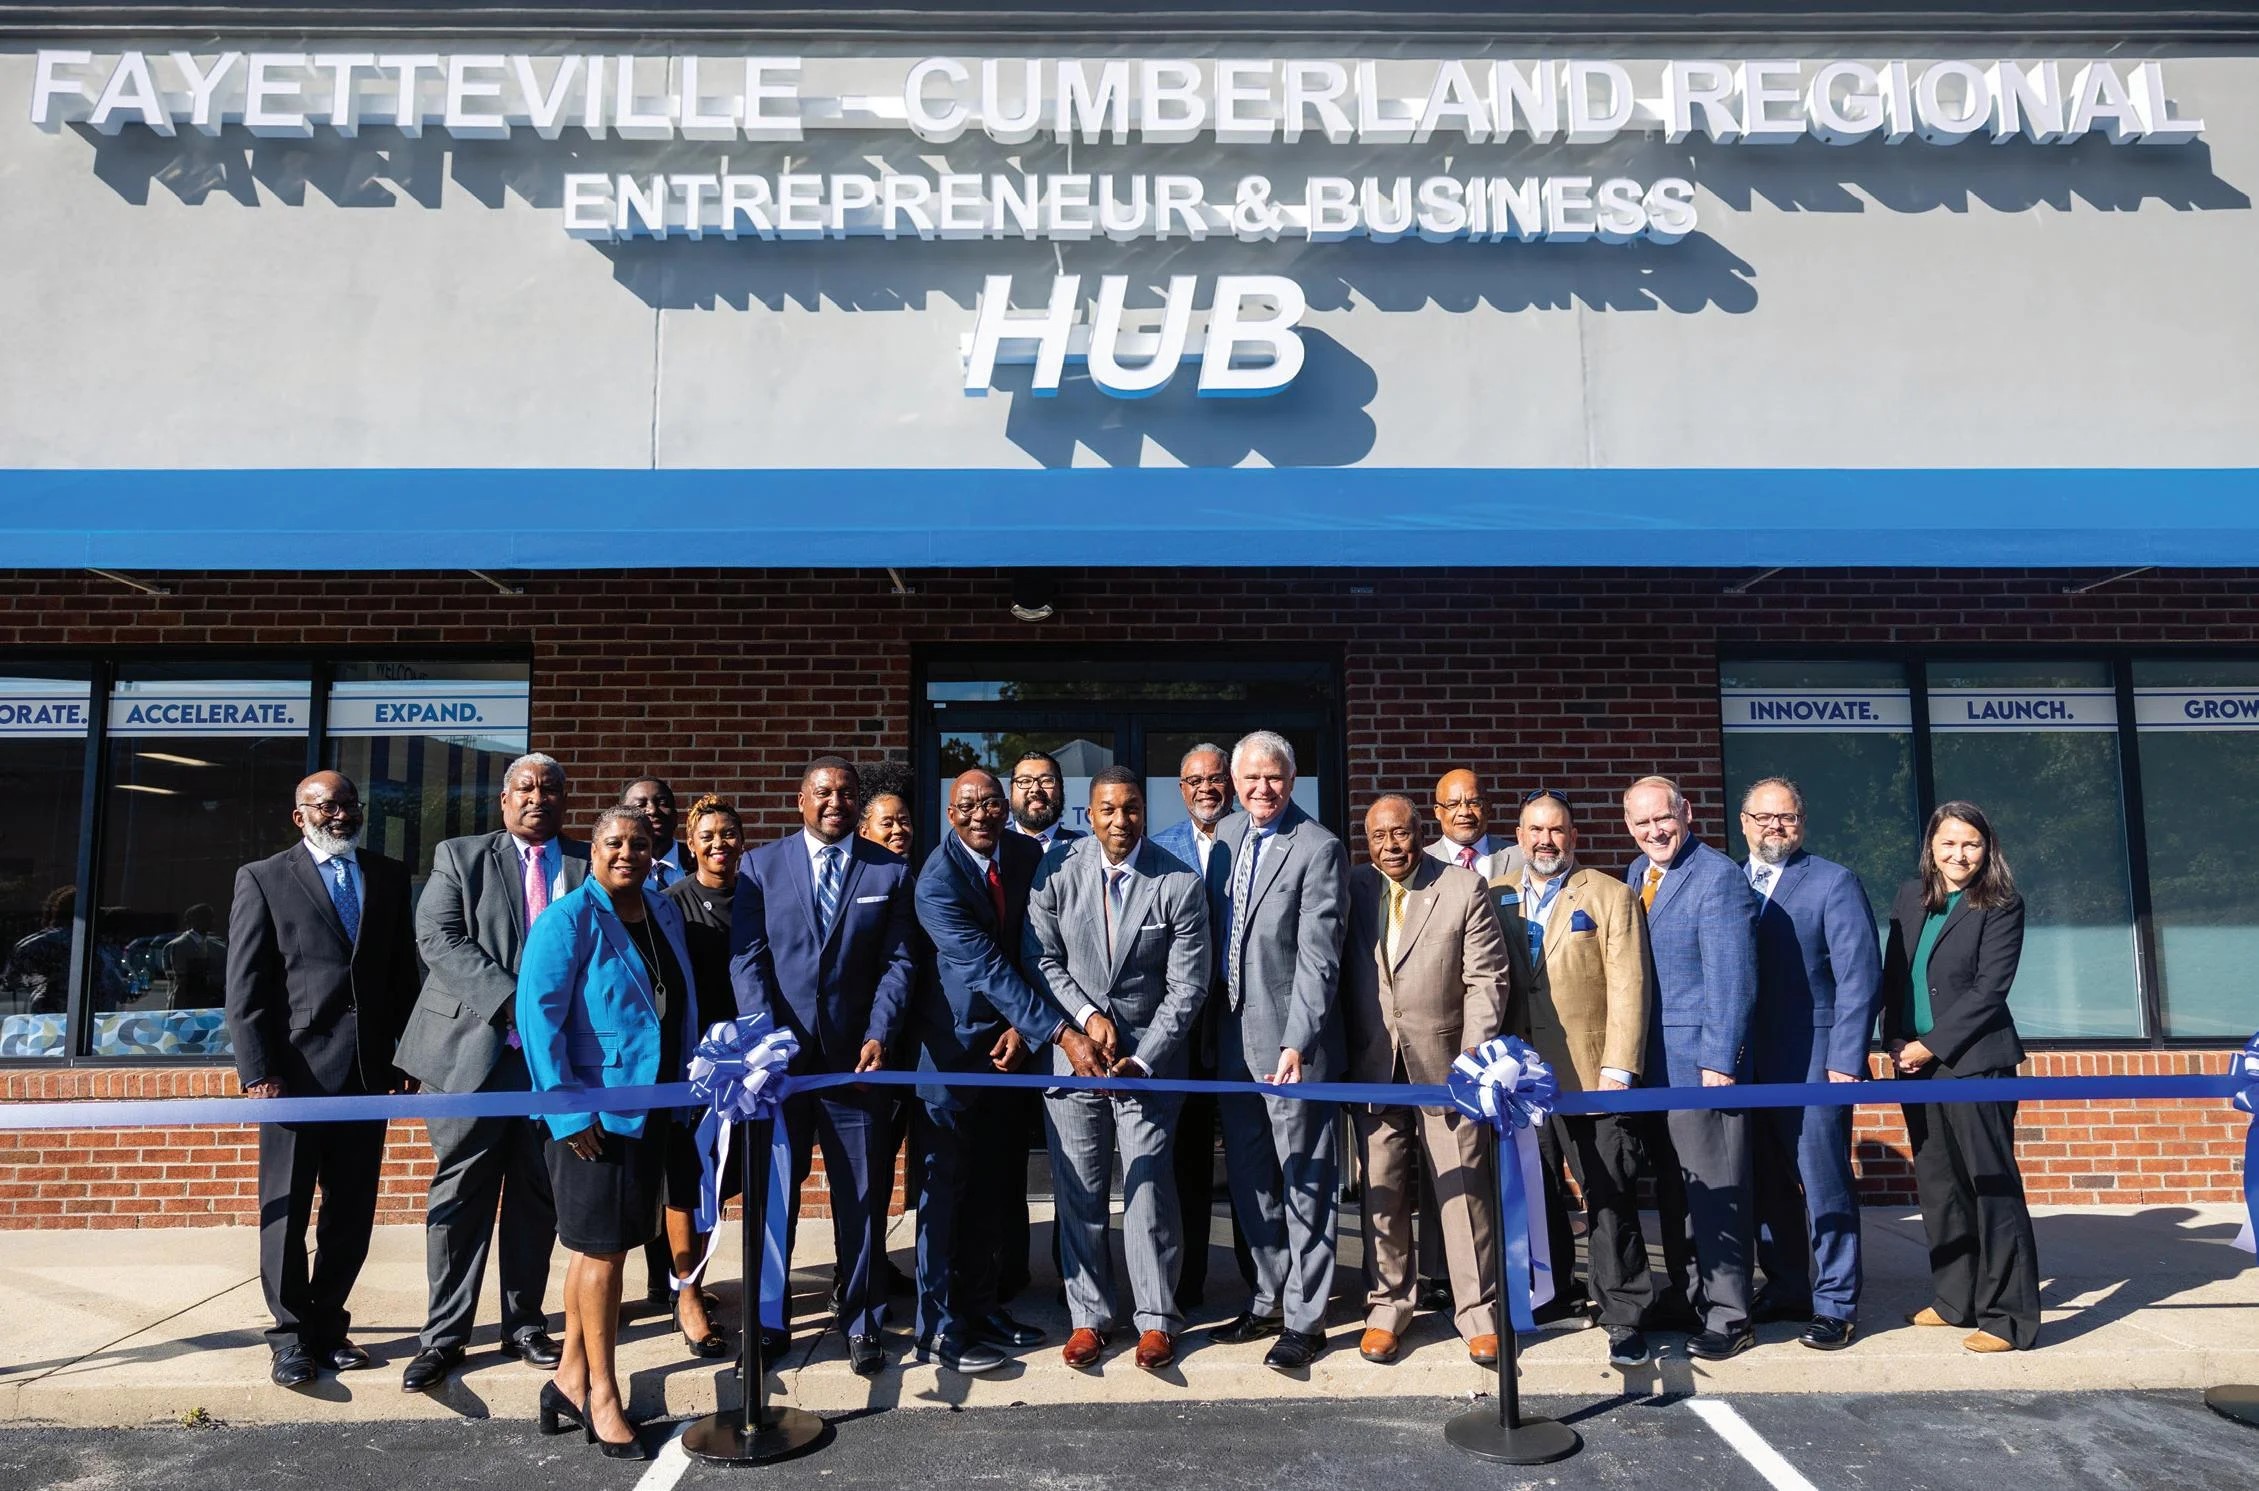 18 individuals in business attire are at a ribbon cutting ceremony. They are standing infront of a building with a sign that says "Fayetteville - Cumberland Regional Entrepreneur & Business Hub."